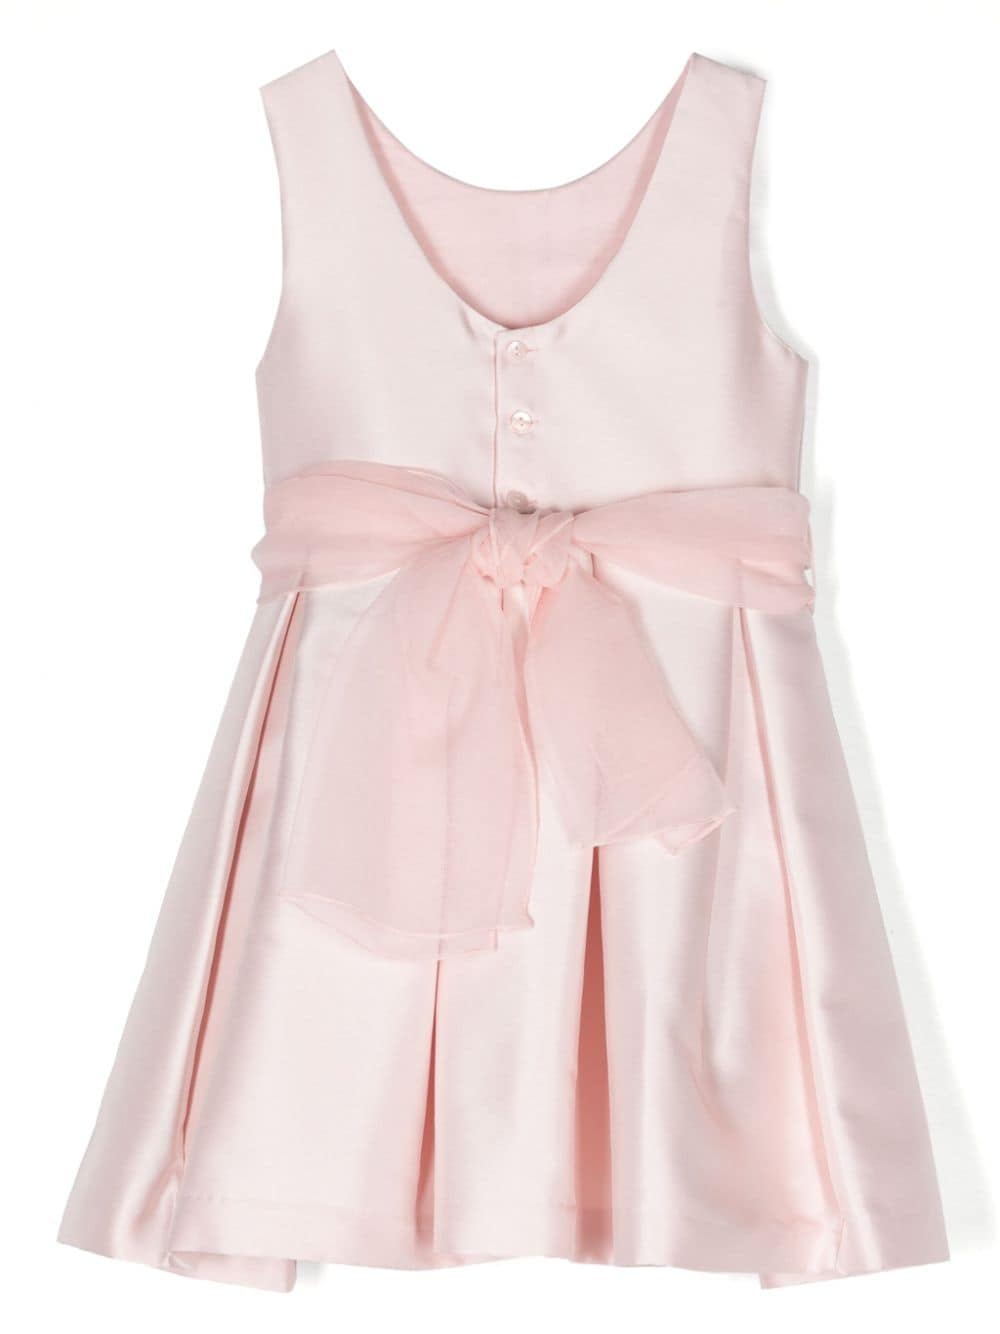 Pink dress for little girls with flowers